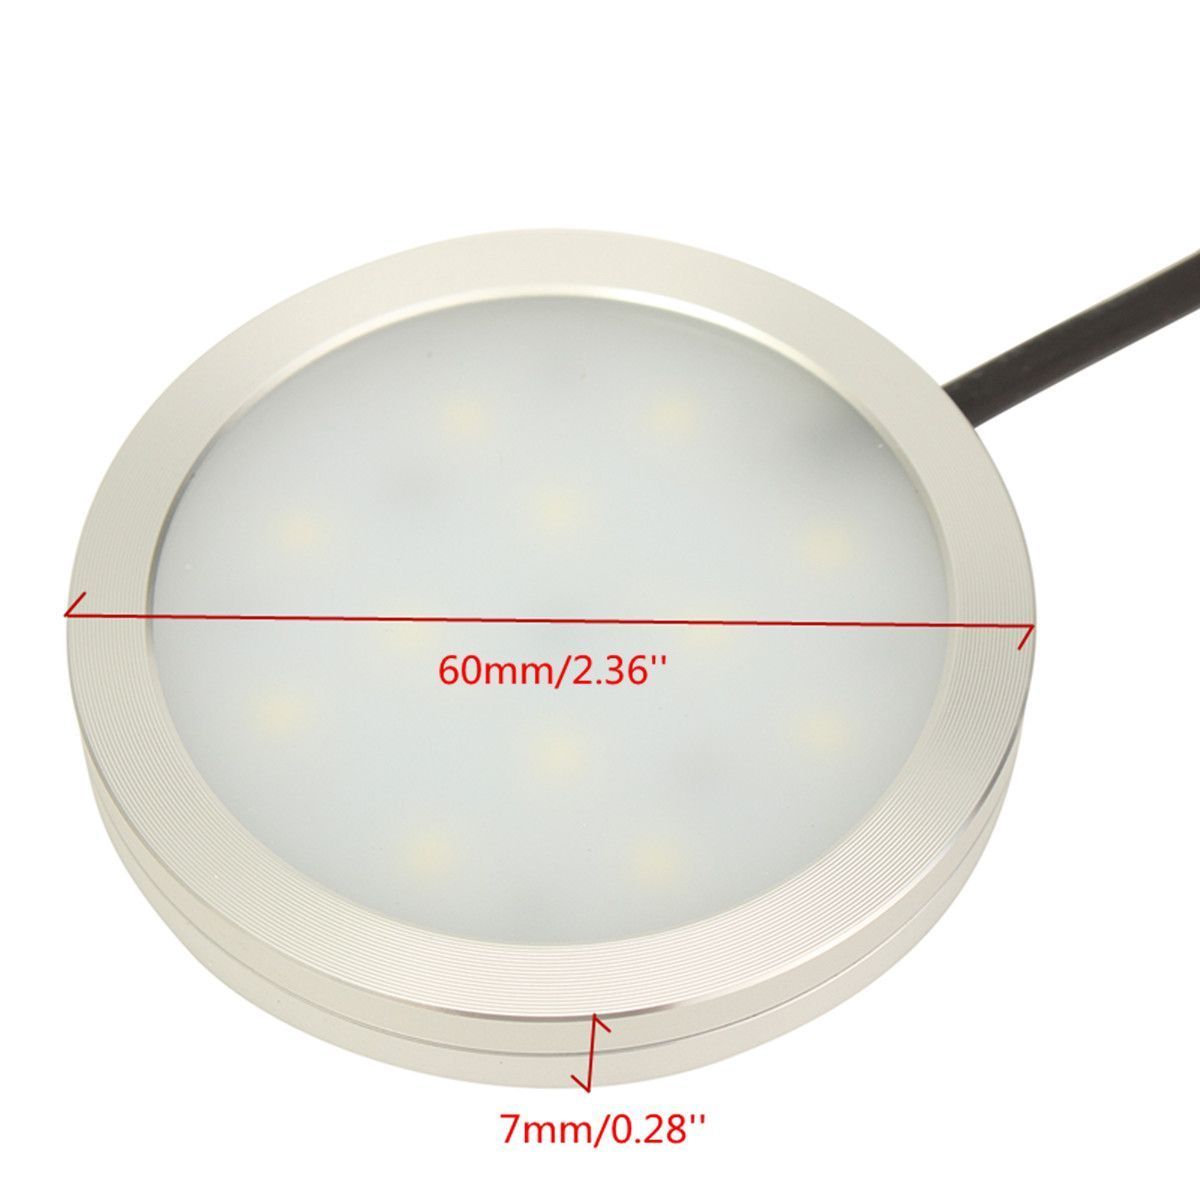 8PCS-LED-Cabinet-Light-White-Dimmable-Kitchen-Counter-Under-Puck-RF-Wireless-Remote-Control--Power-S-1682682